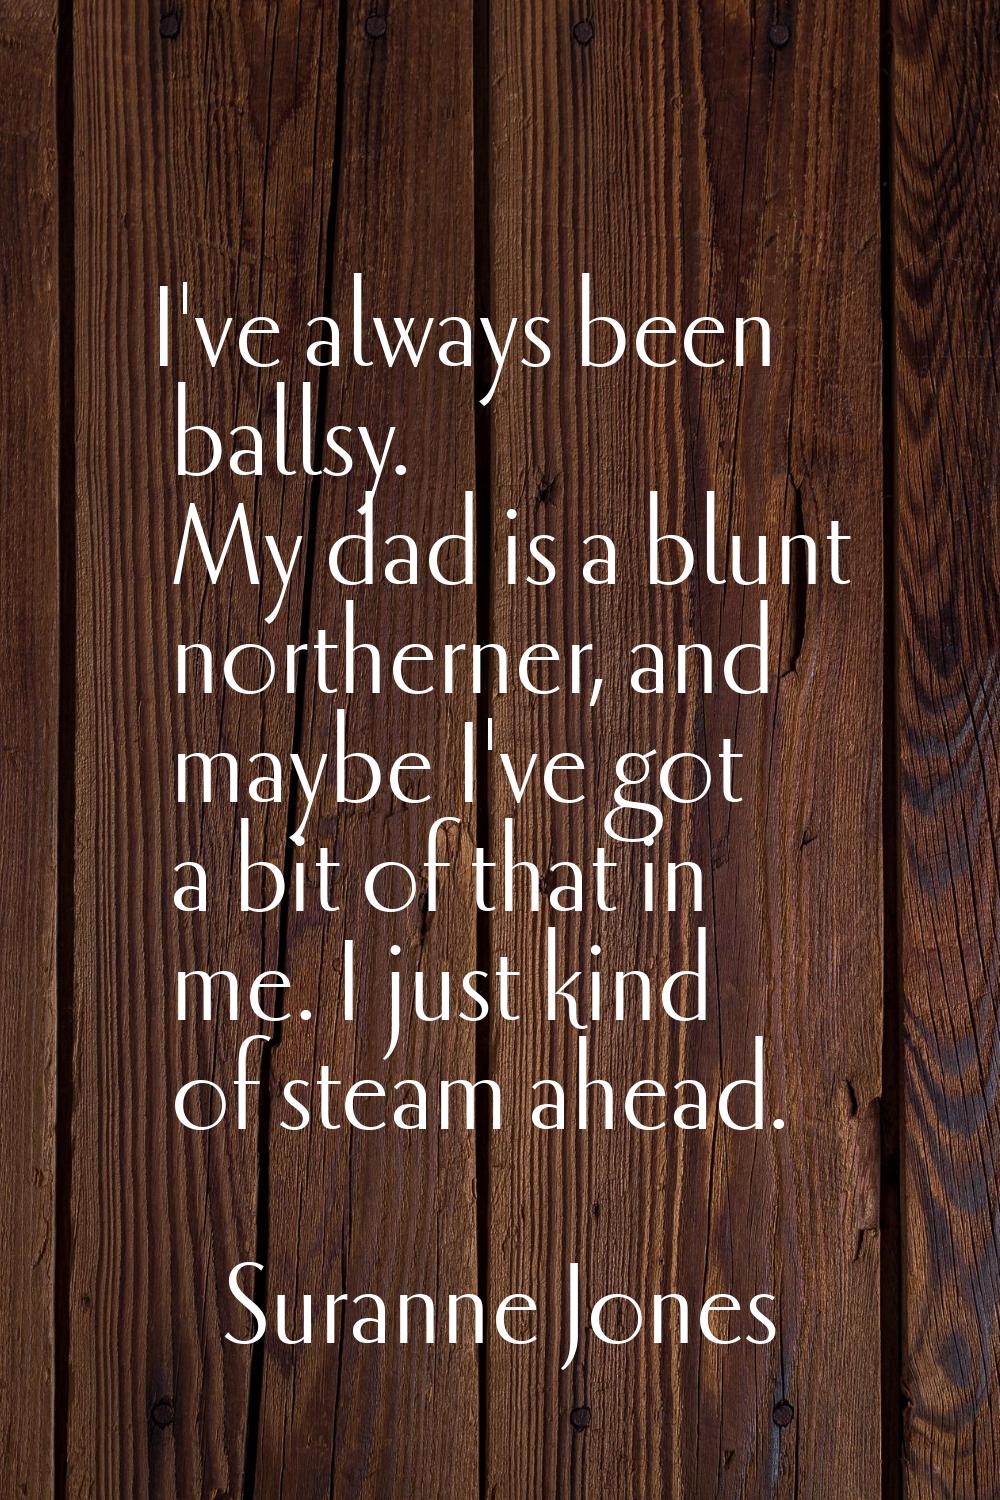 I've always been ballsy. My dad is a blunt northerner, and maybe I've got a bit of that in me. I ju